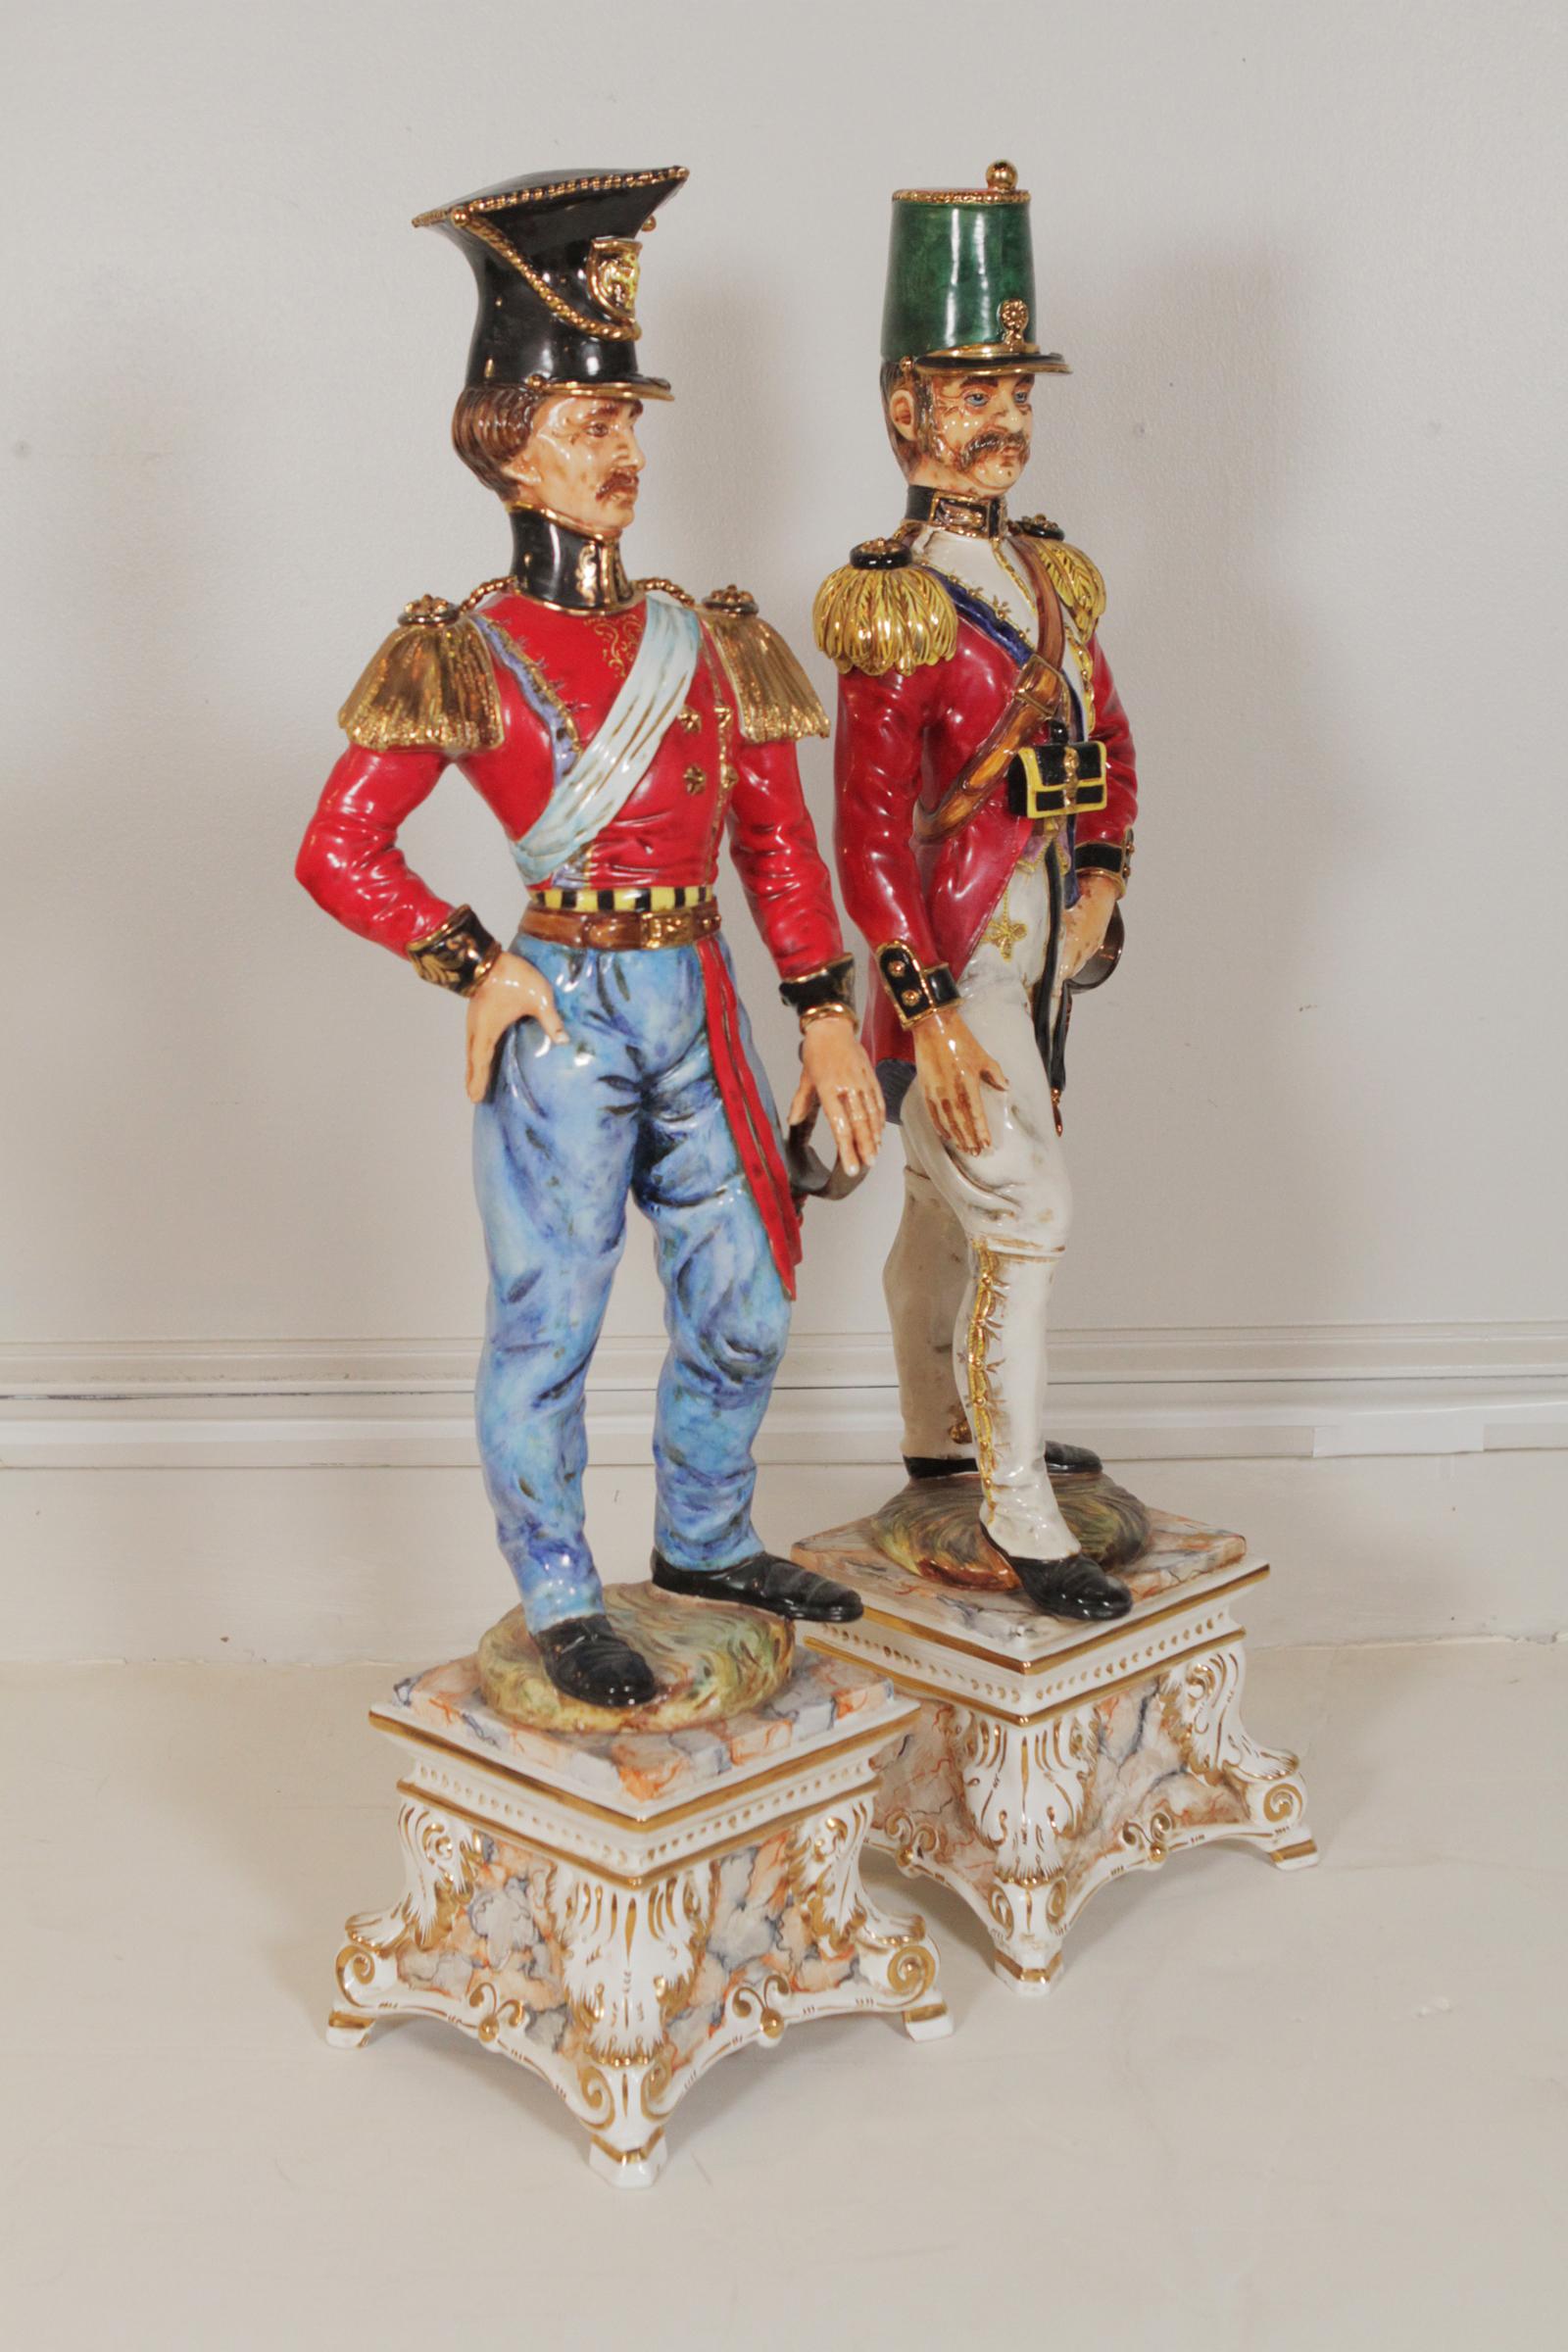 Huge antique pair of 37” tall porcelain soldiers, made in Italy circa 1870-1880 by Bartolomeo Gassio. Dimensions: 37” x 9.5”
The first titled Carabineer, the second, Sargent of Piedmont Guard. Bartolomeo worked in Naples from 1865 to 1913.
 